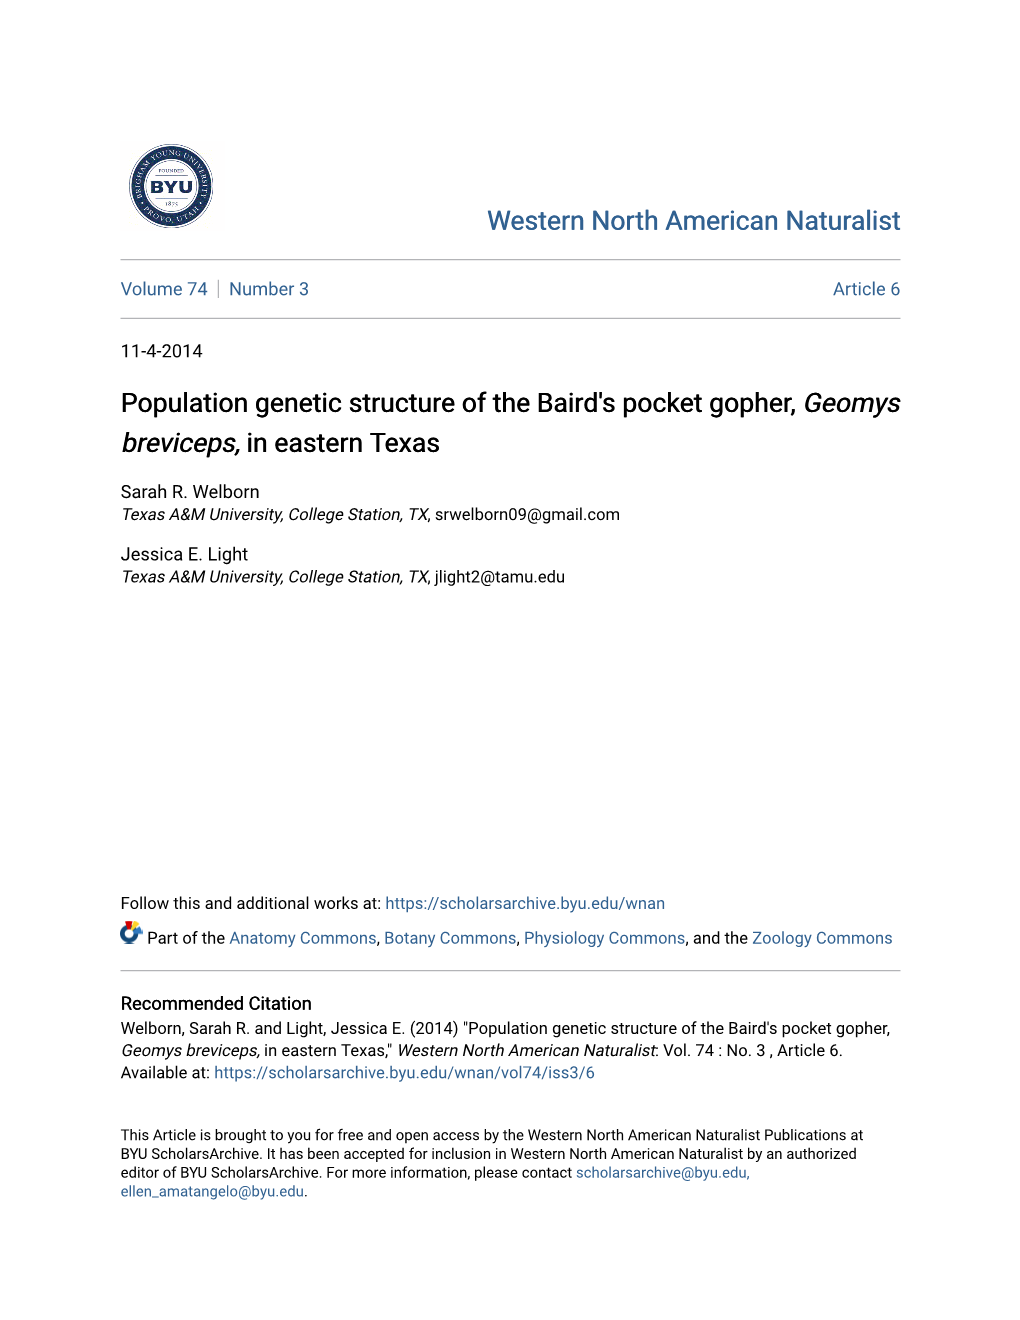 Population Genetic Structure of the Baird's Pocket Gopher, Geomys Breviceps, in Eastern Texas